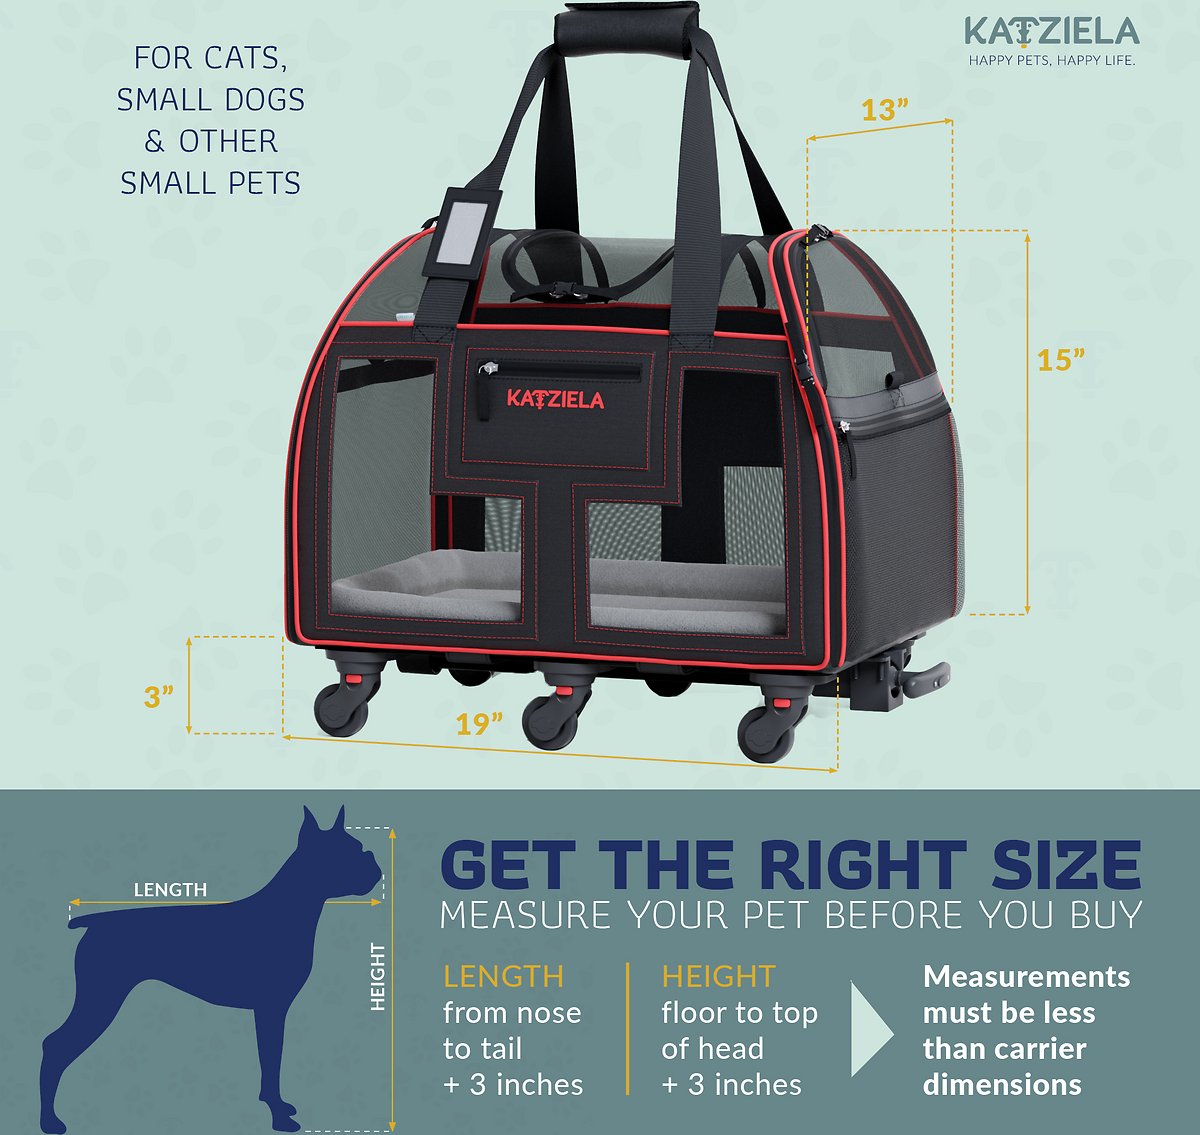 Katziela Rolling Pet Carrier Airline Approved – Pet Carrier with